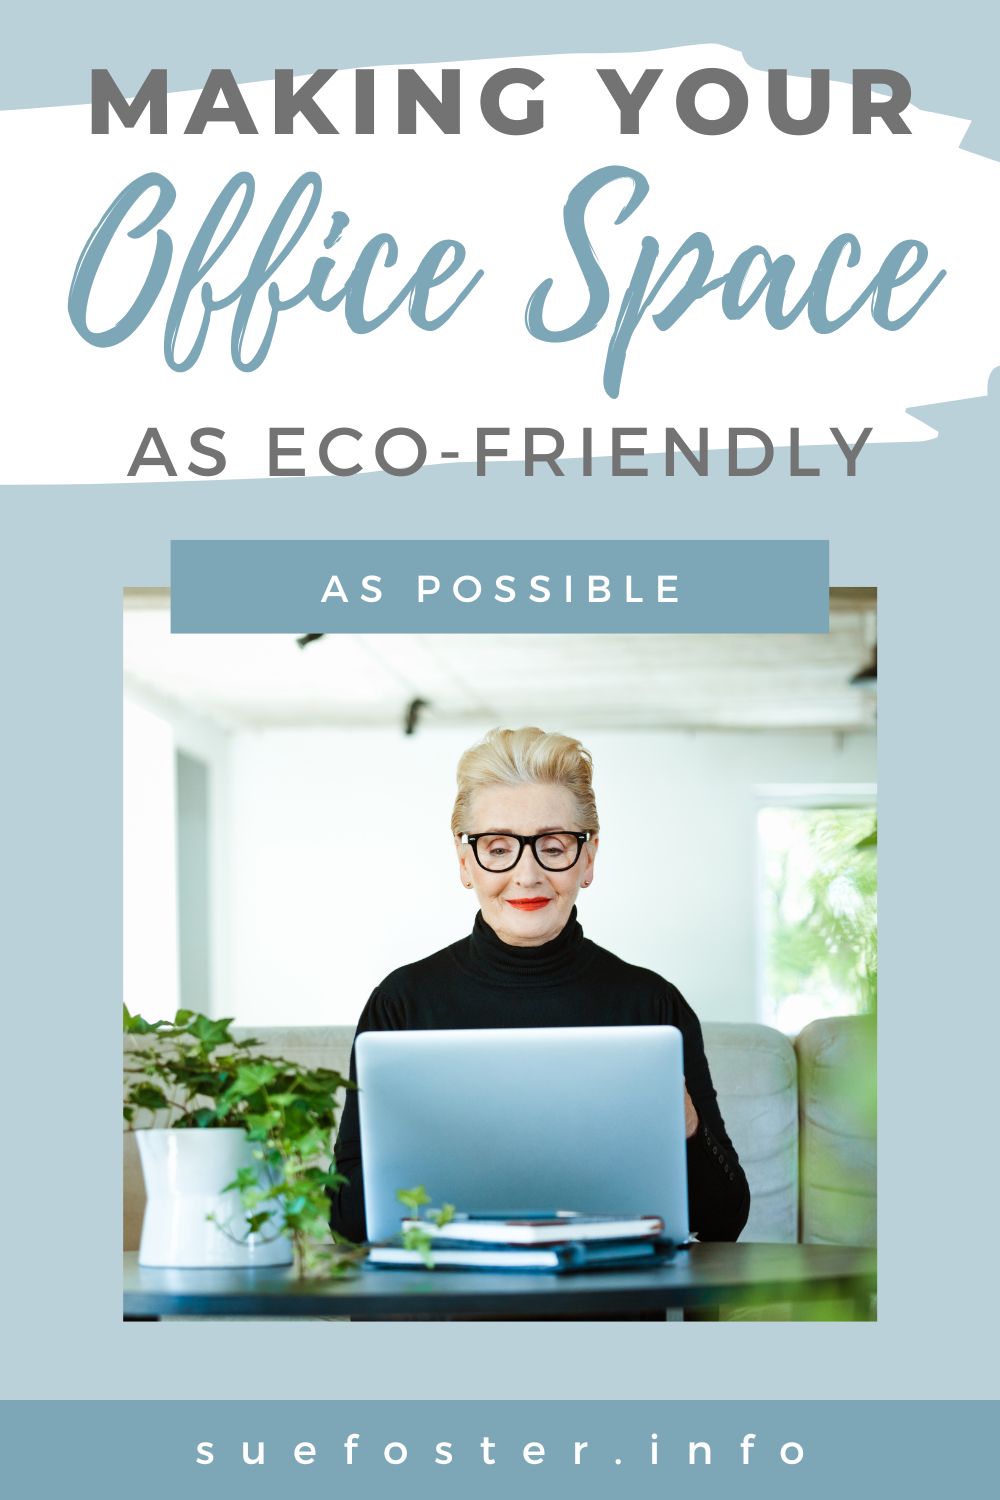 Have you ever thought about making your office space an eco-friendlier environment? There are so many different ways that you can go about this.